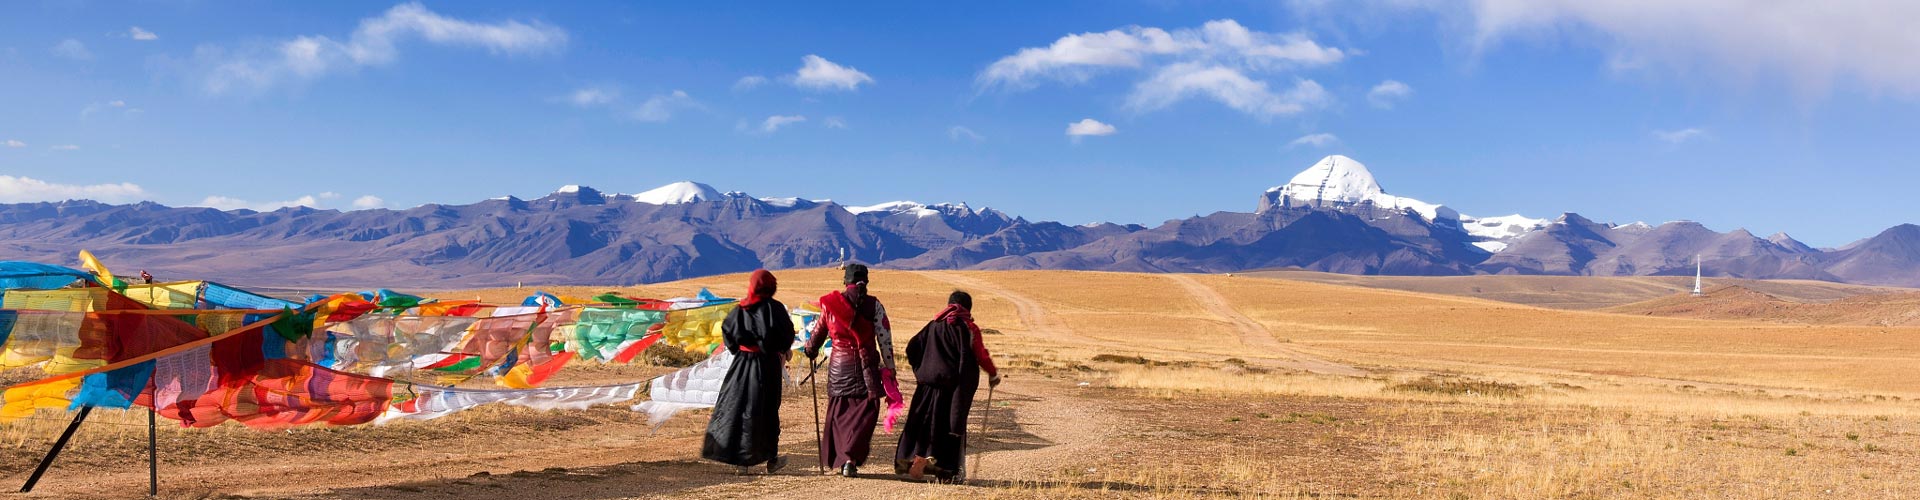 Get closer to the Tibetan Plateau with us on foot. Join in Tibet Trekking Tour to unvail the mysteries of the wonders on the roof of the world. 